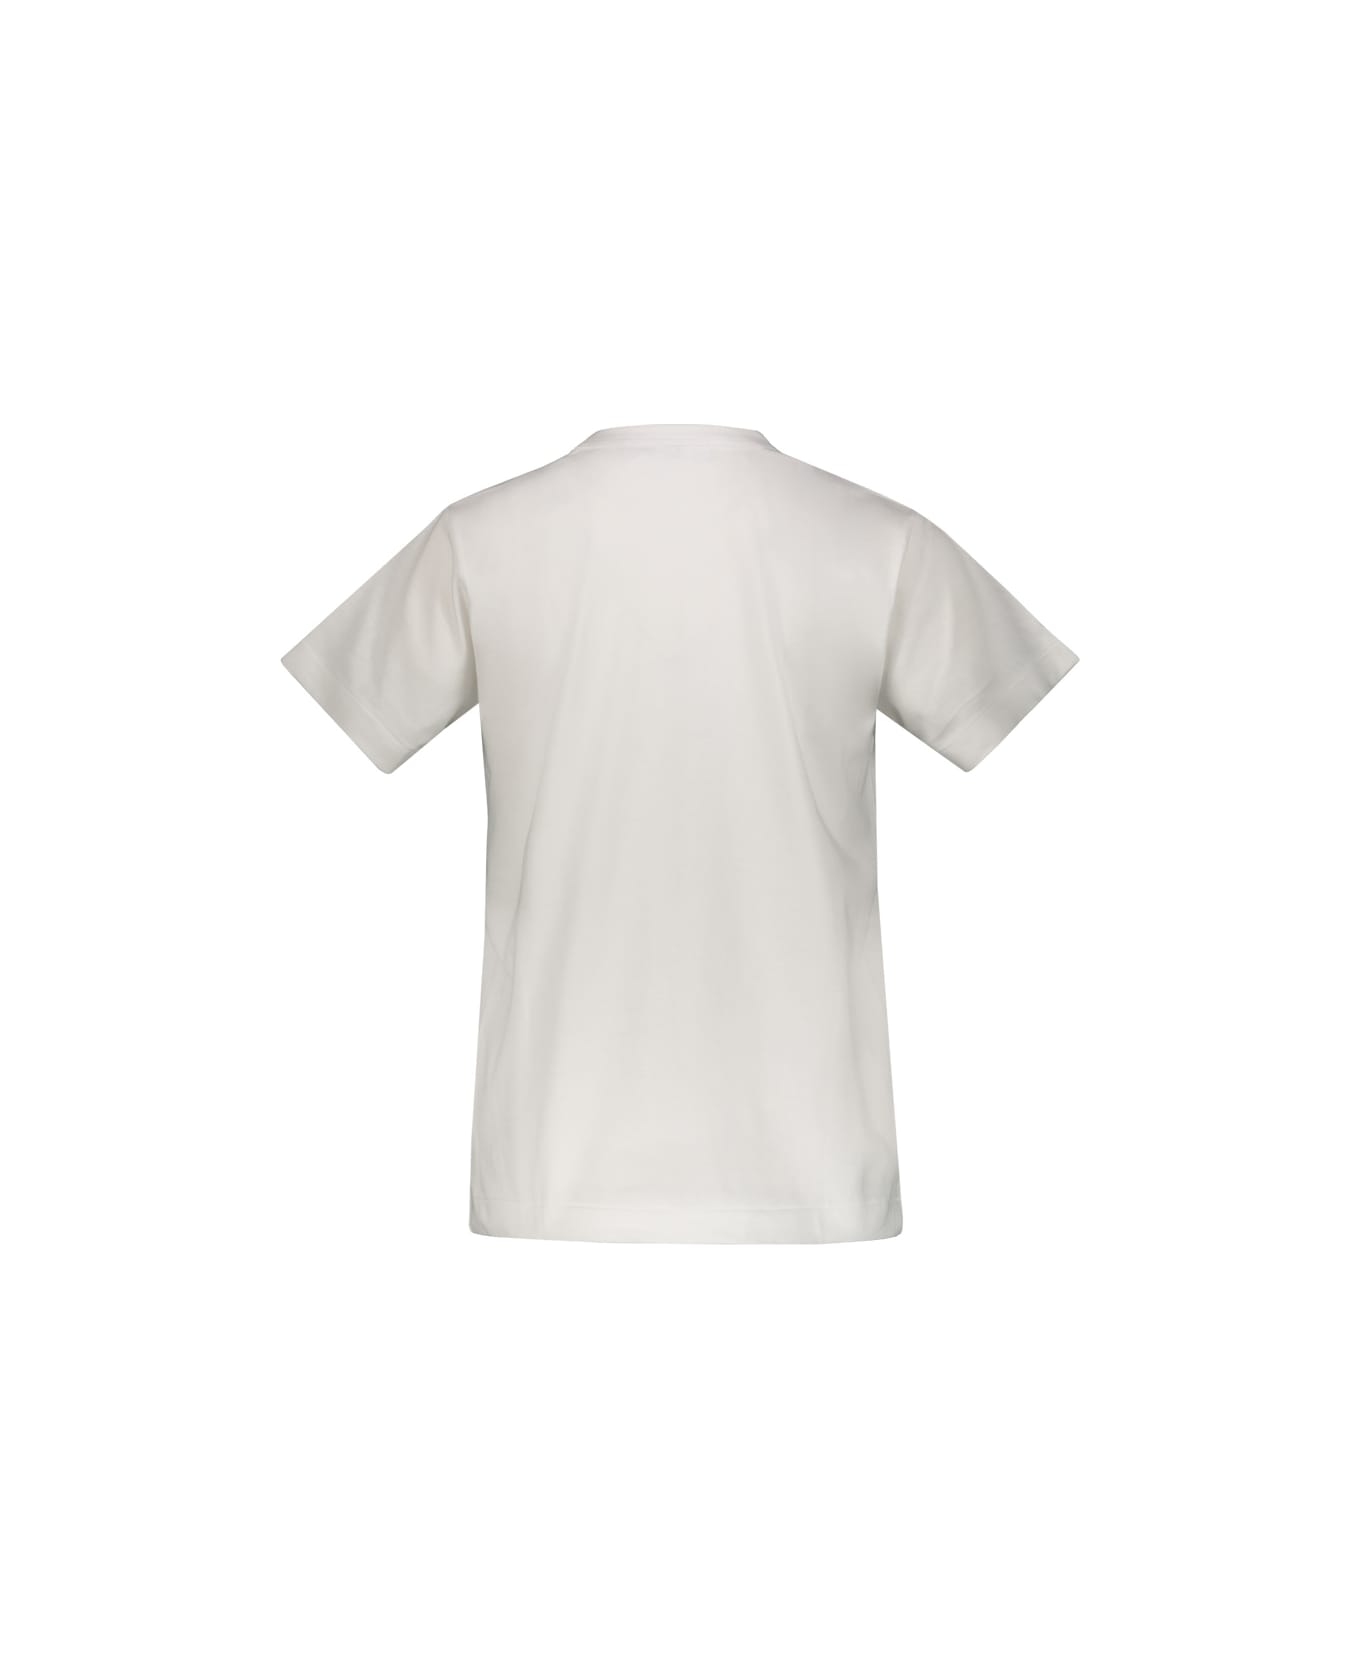 Comme des Garçons Play White T-shirt With Printed Red Heart - Blk